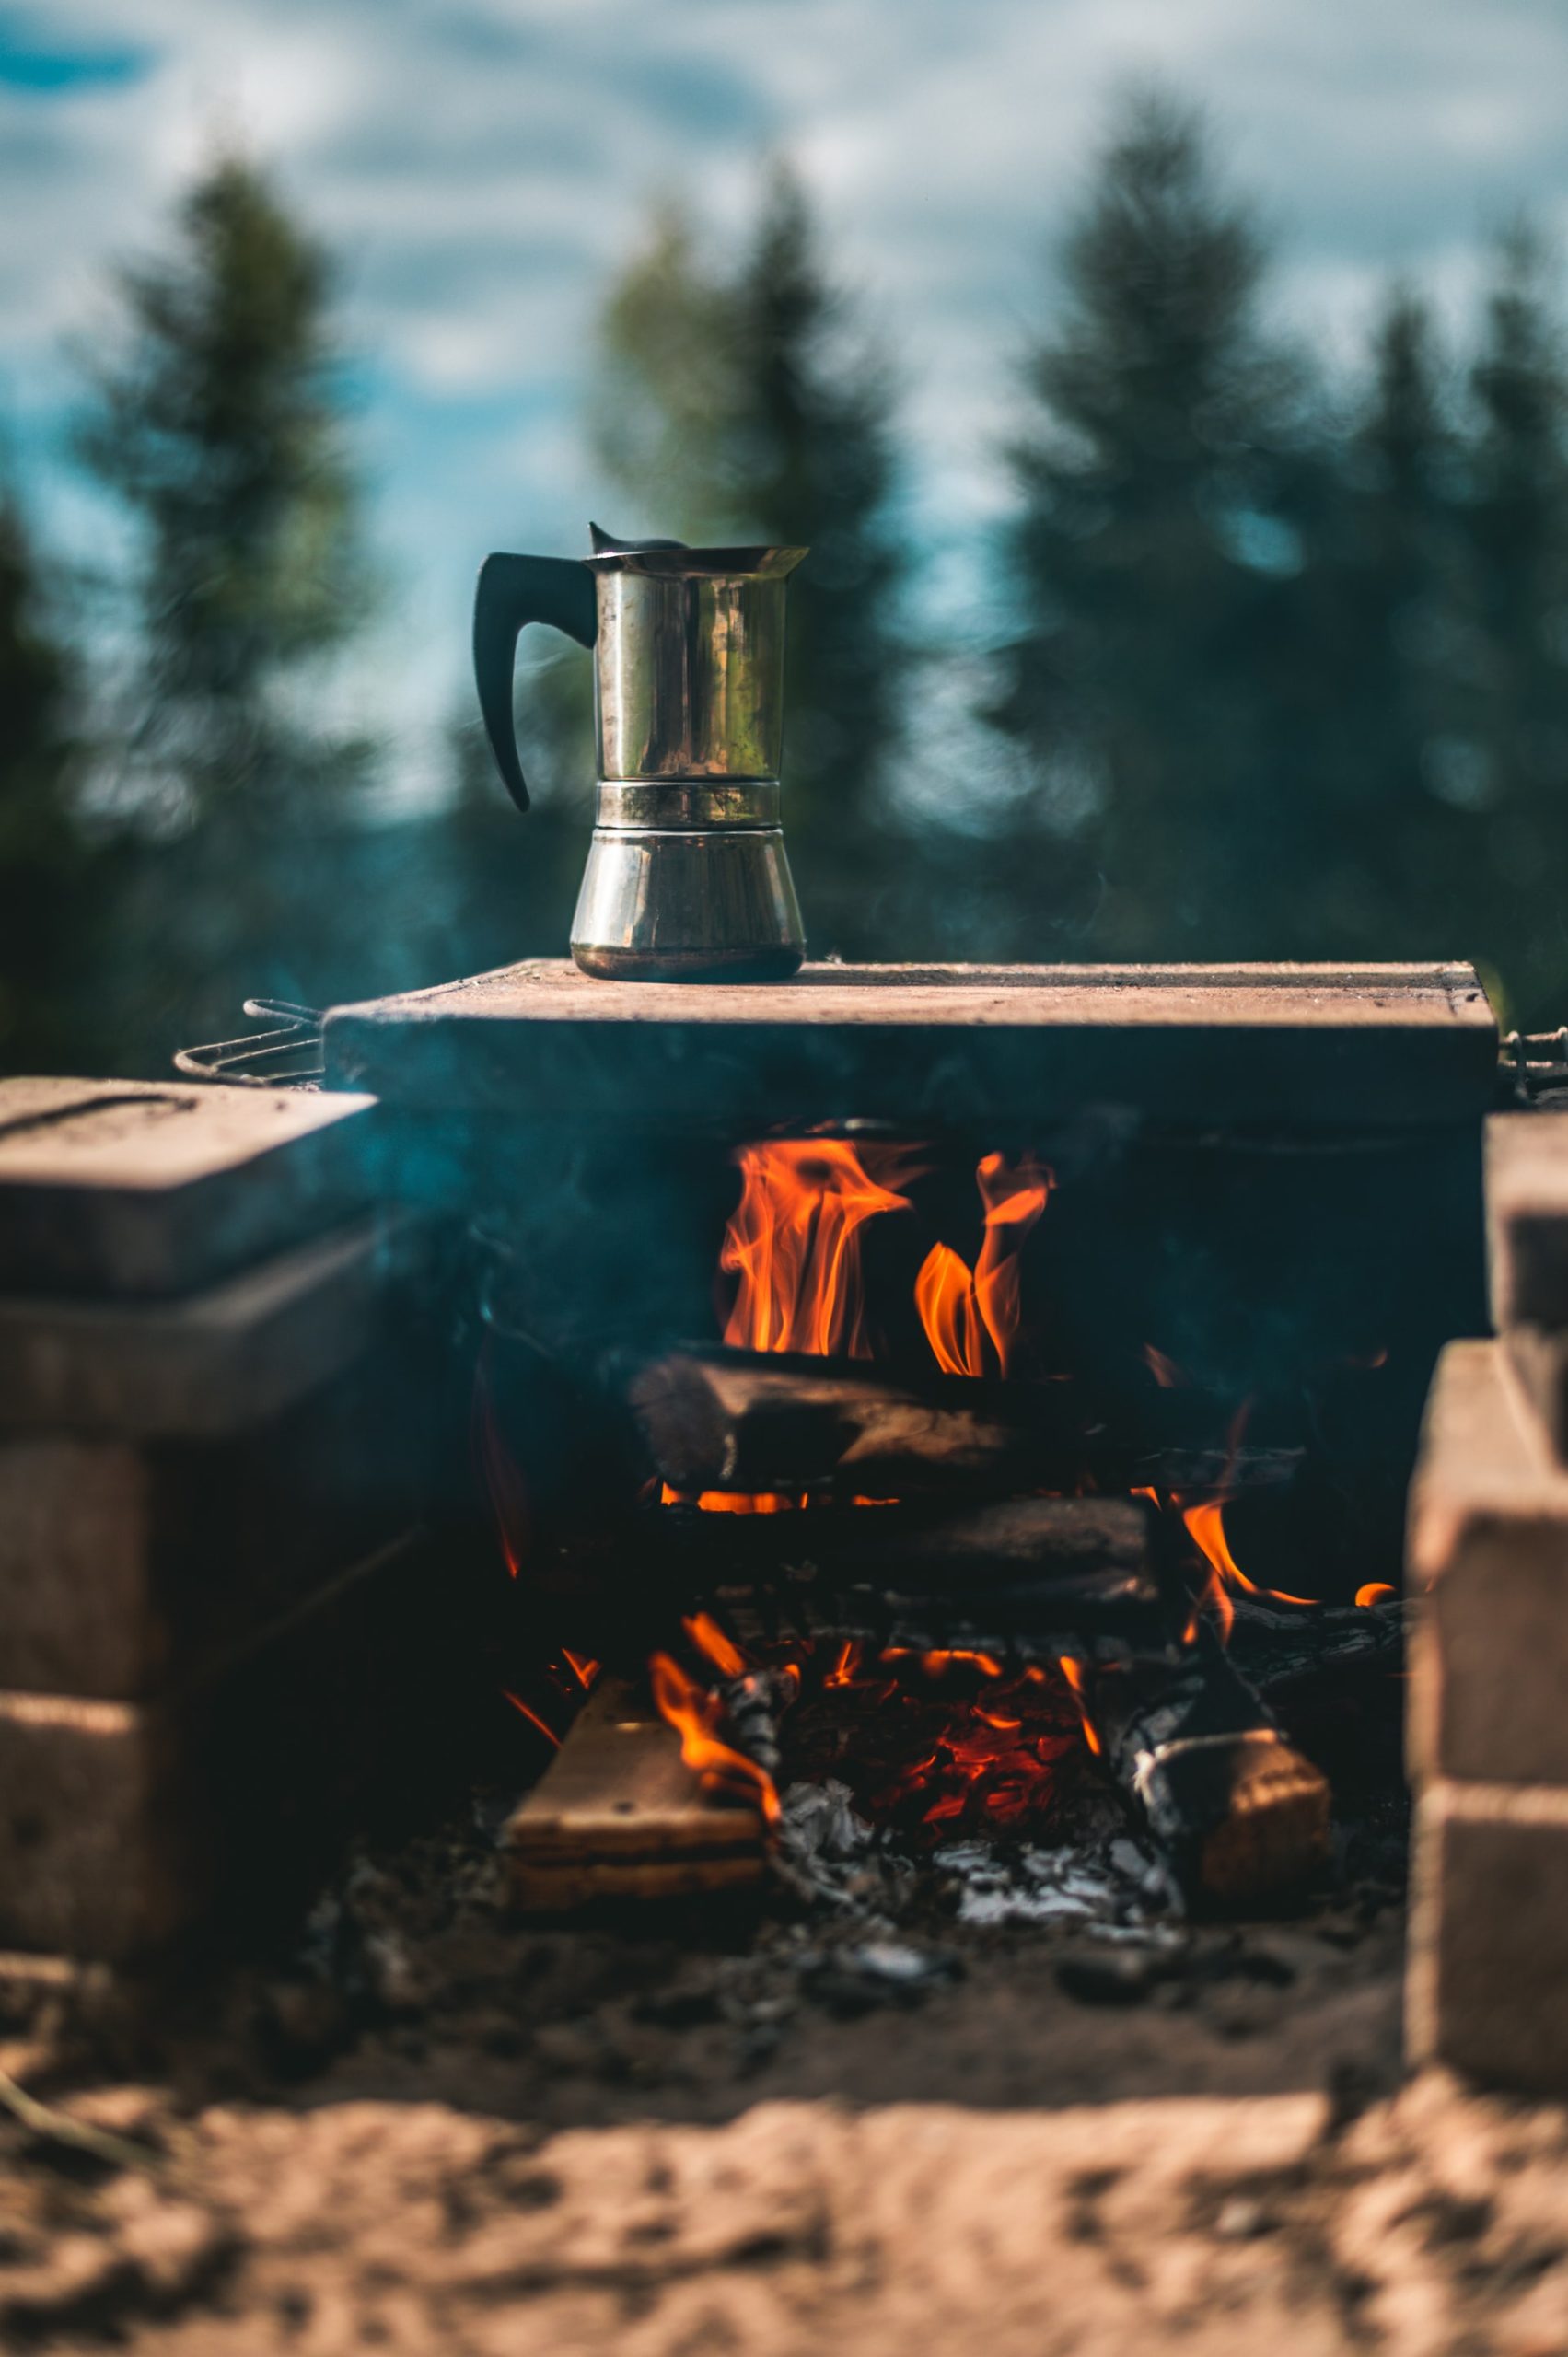 How to Use a Camping Coffee Percolator The Ultimate Guide